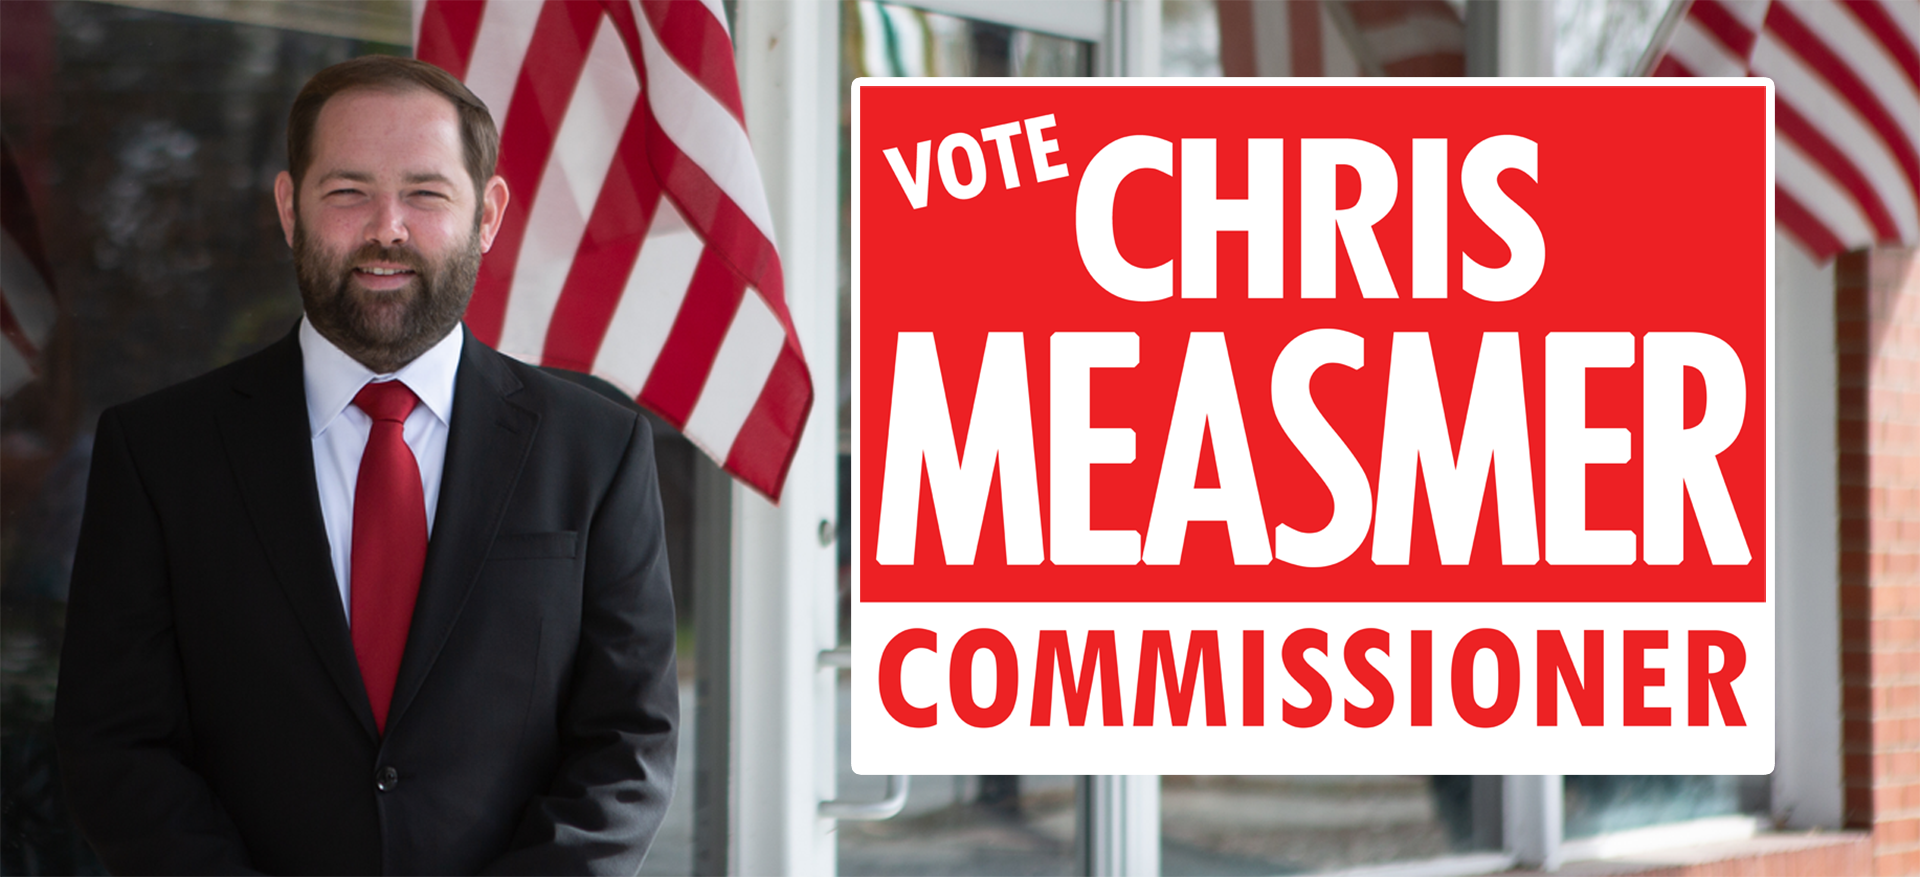 Chris Measmer for Cabarrus County Commissioner